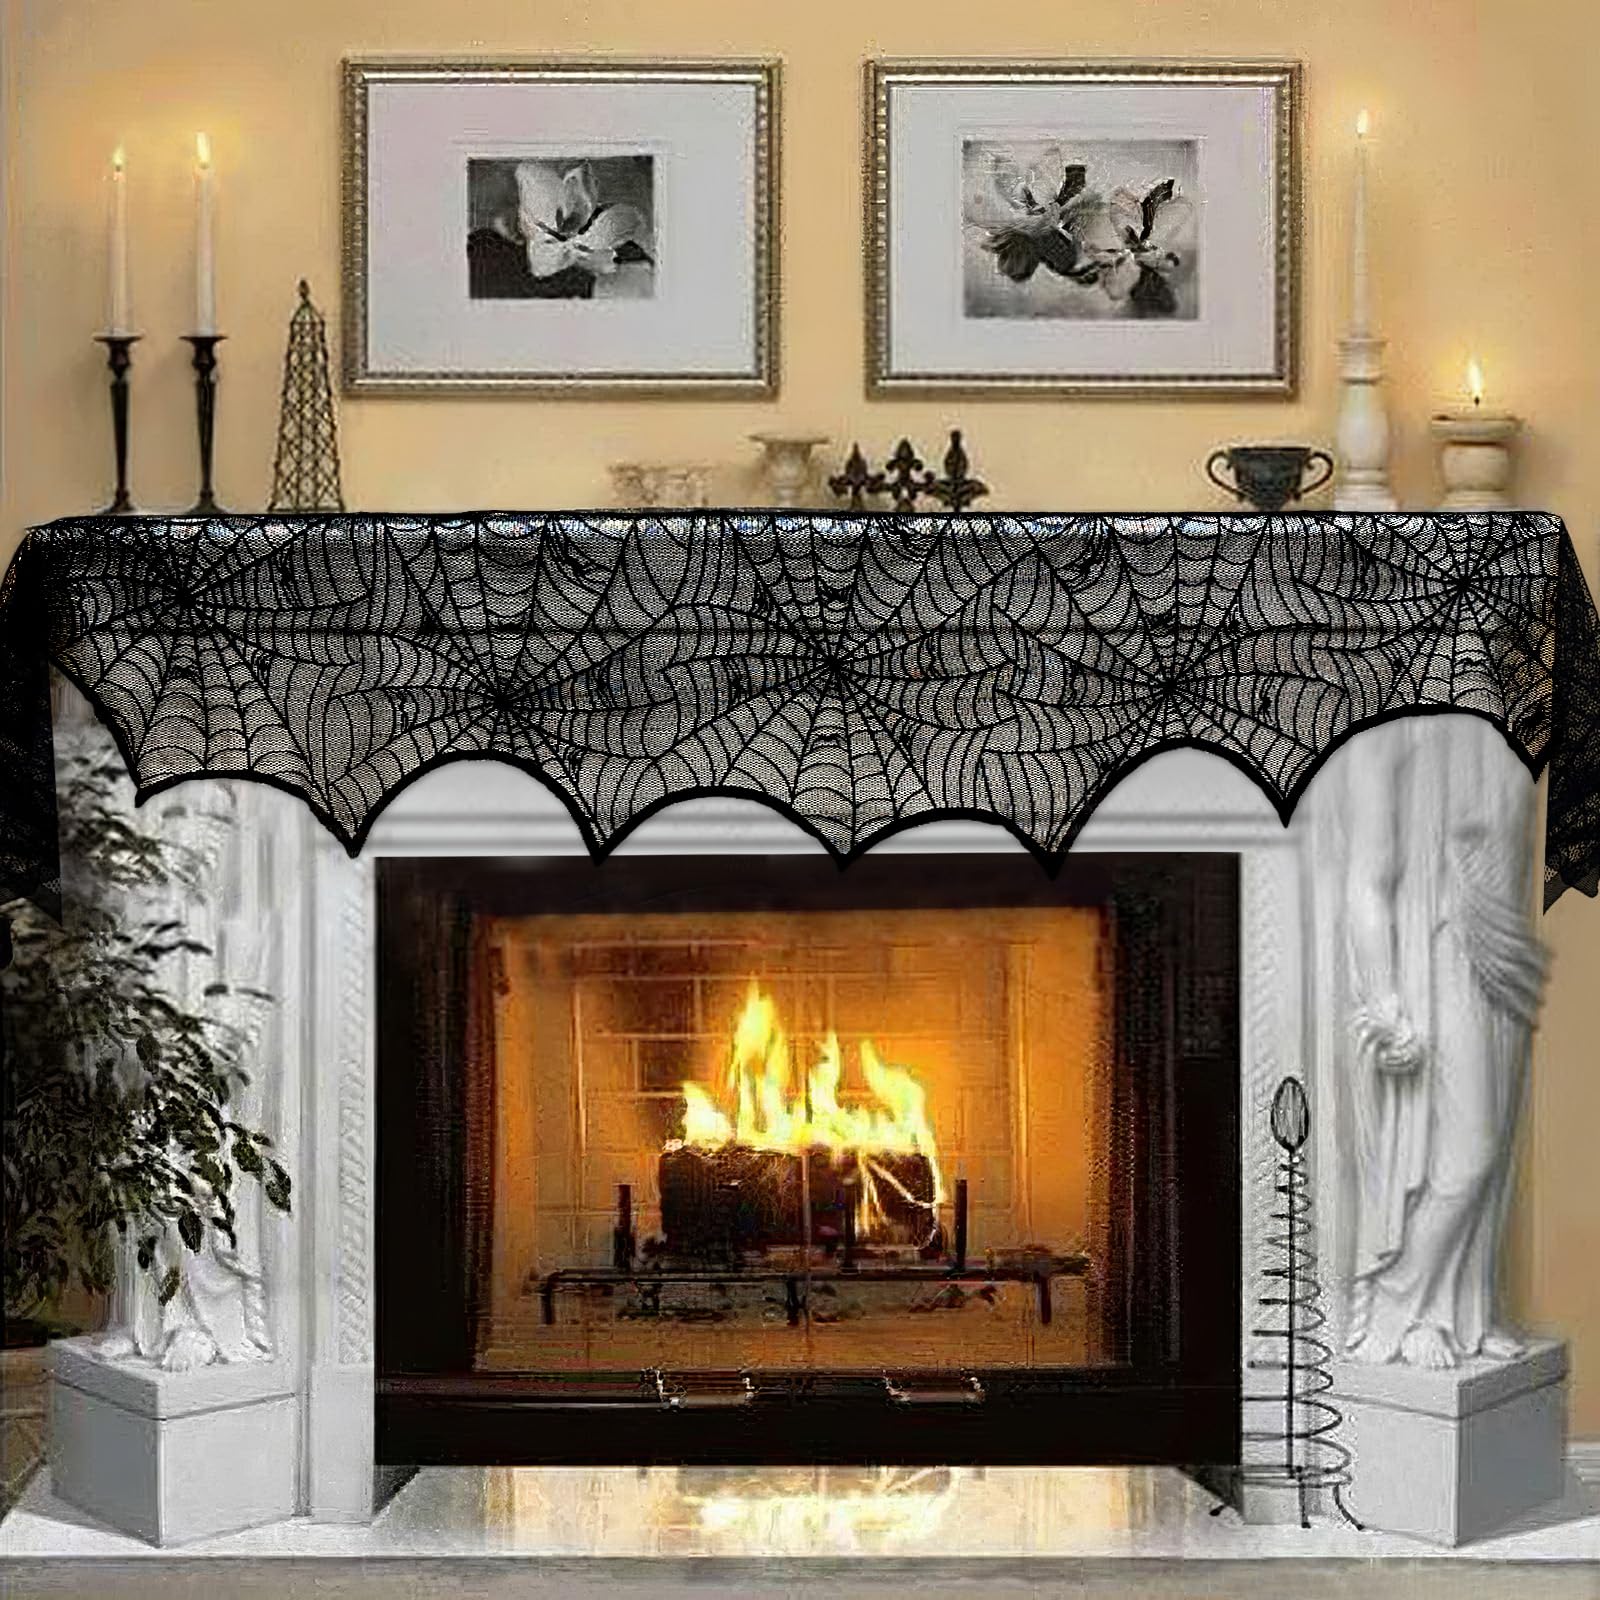 AerWo Halloween Decorations Black Lace Spiderweb Fireplace Mantle Scarf Cover for Halloween Mantle Decor Festive Party Supplies,18 x 96 inch